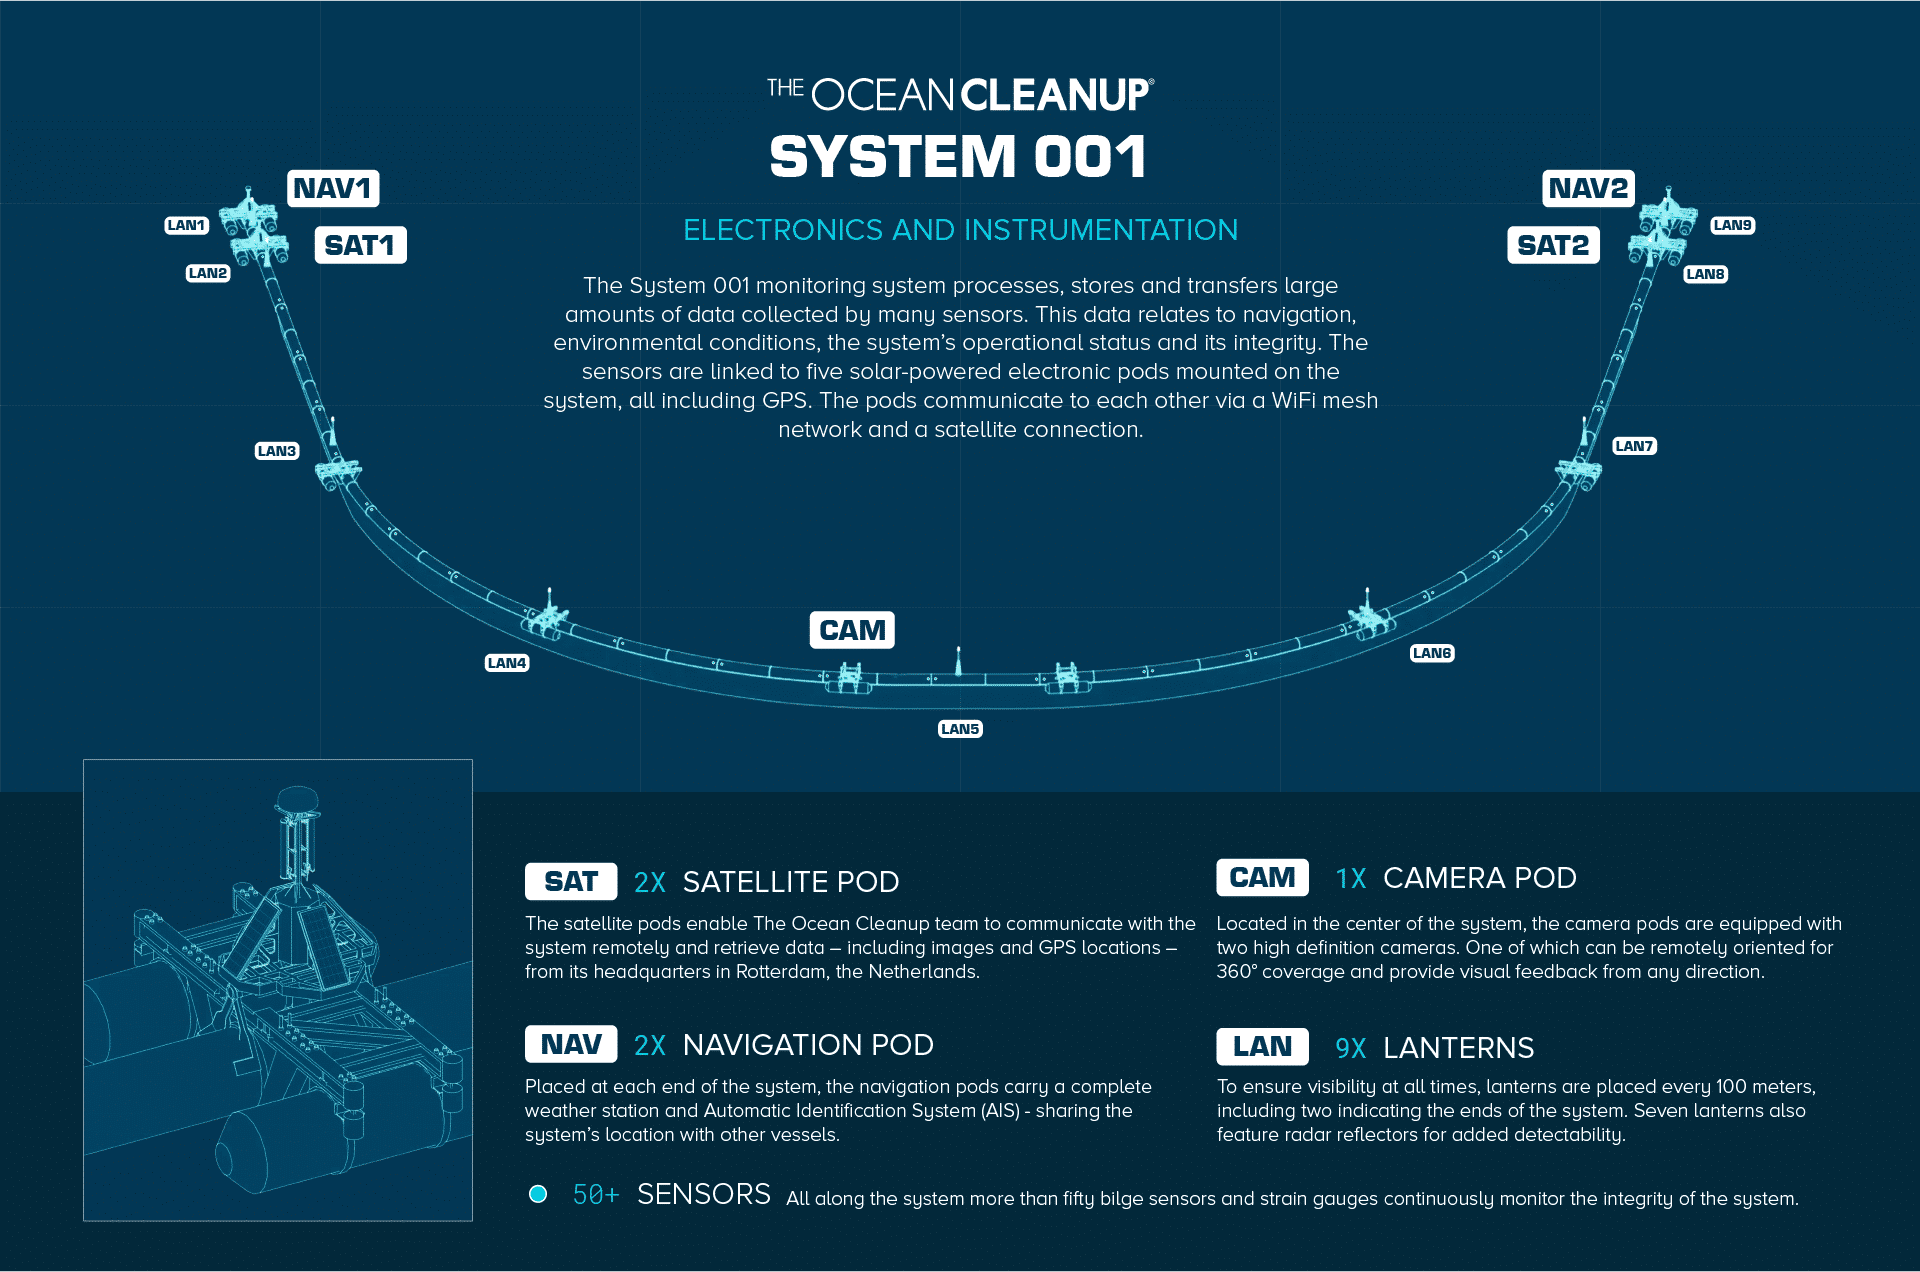 The ocean cleanup project